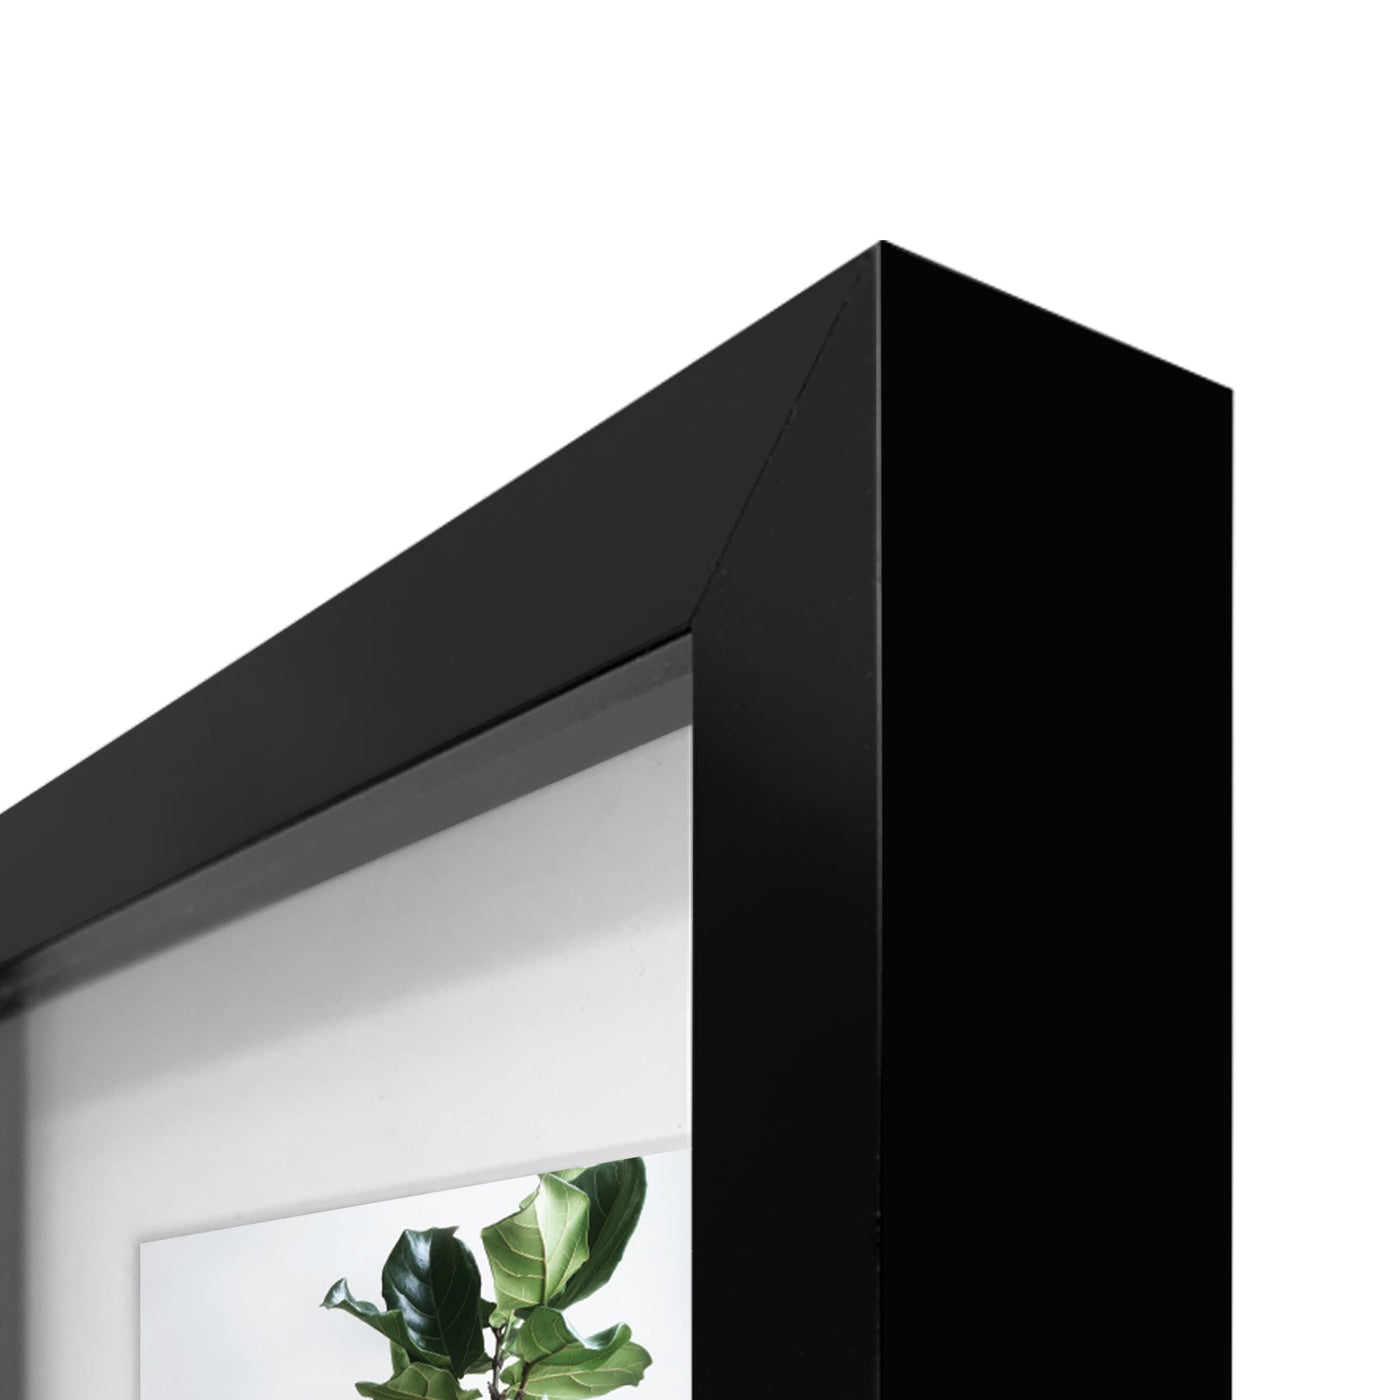 Brighton Black Square Shadow Box Timber Photo Frame from our Australian Made Shadow Box Frames collection by Profile Products Australia